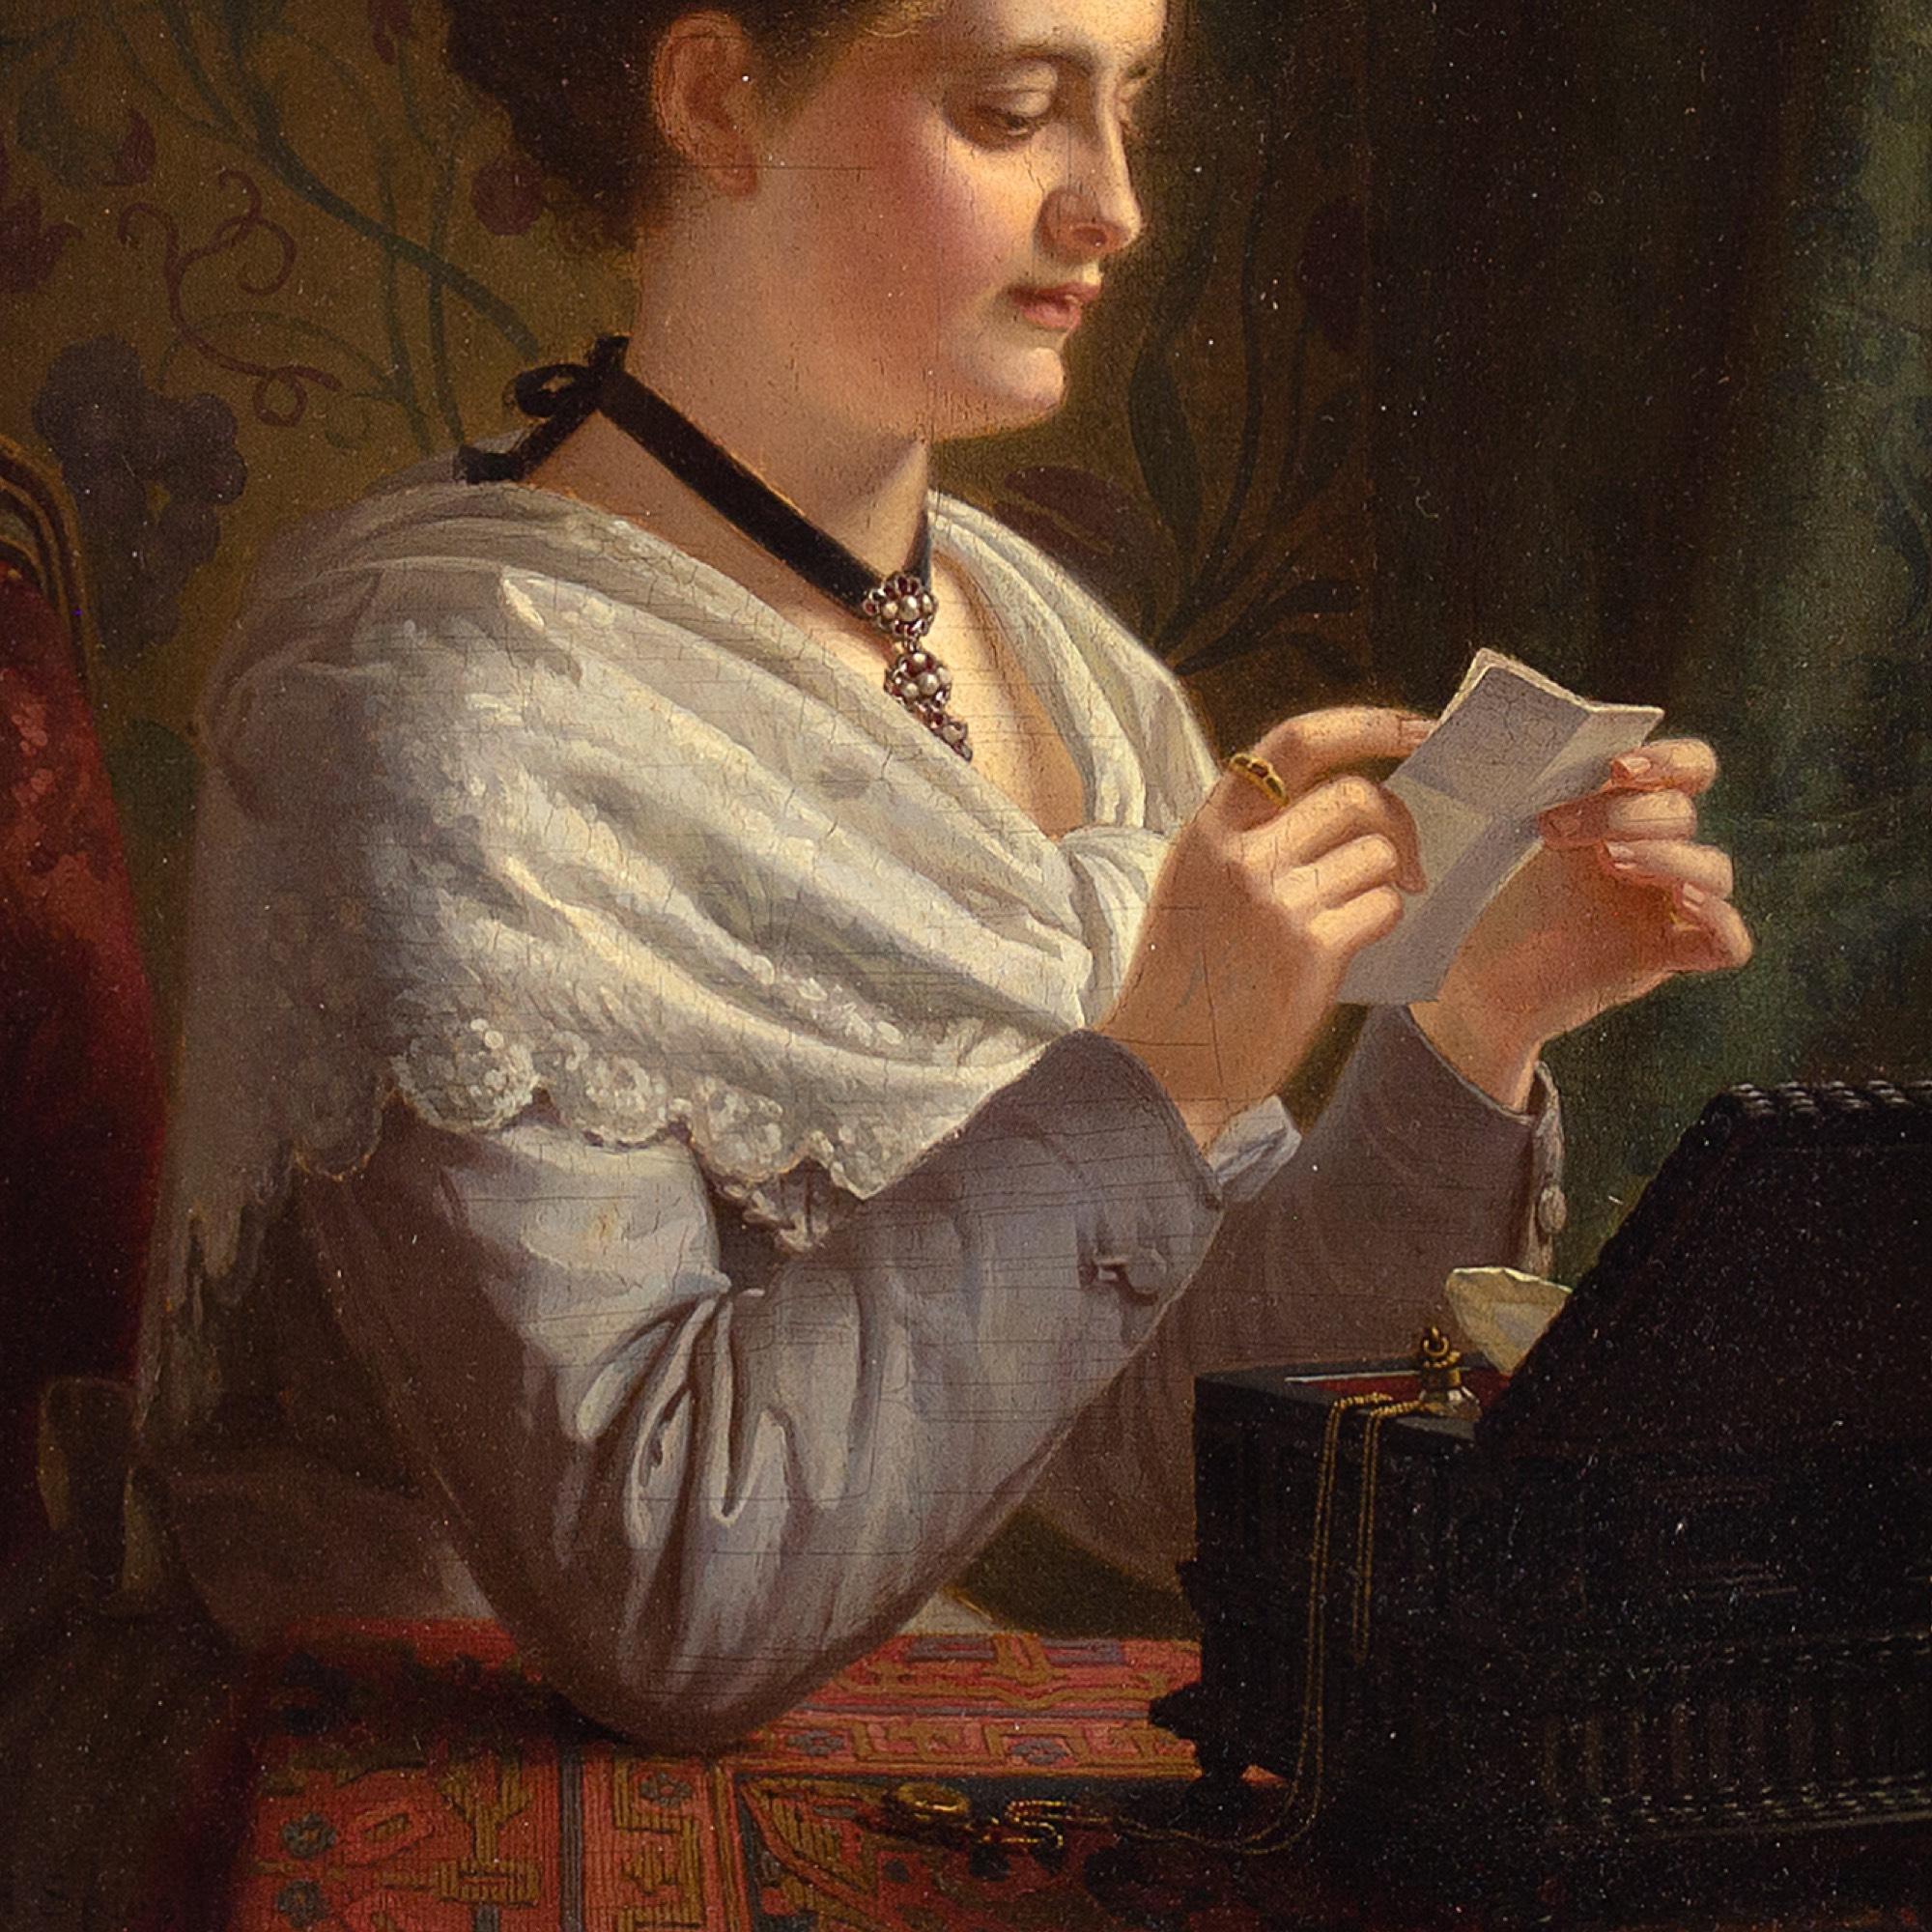 This mid-19th-century oil painting by German artist Heinrich Spiess (1832-1875) depicts a young lady reading a love letter. It’s an accomplished work by an artist with a profound admiration for the old masters.

Once again, she’s returned to her